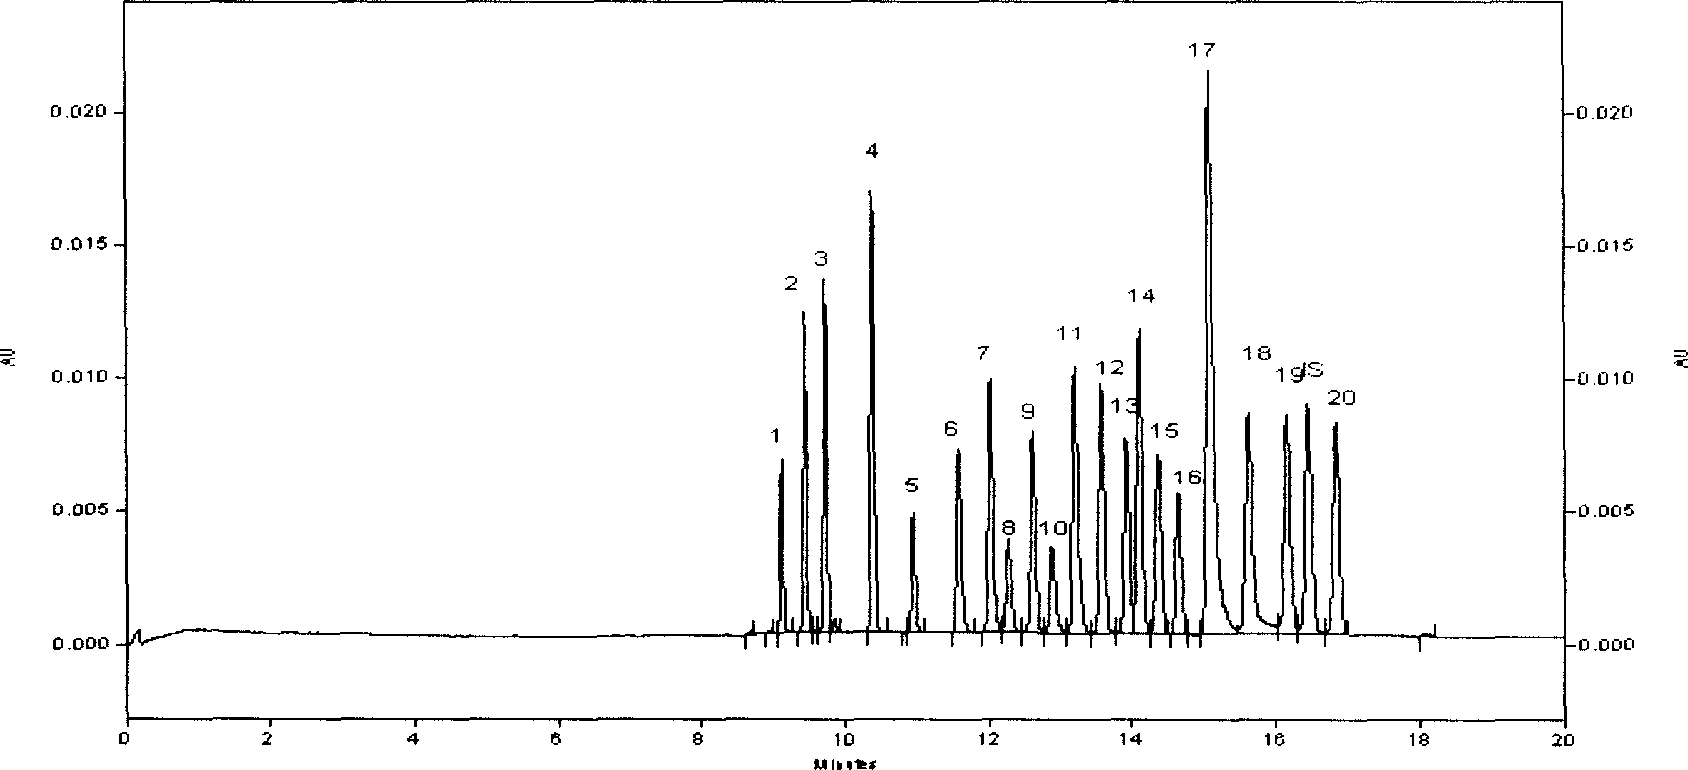 Capillary electrophoresis method for detecting medications and poisons in blood and urine at the same time